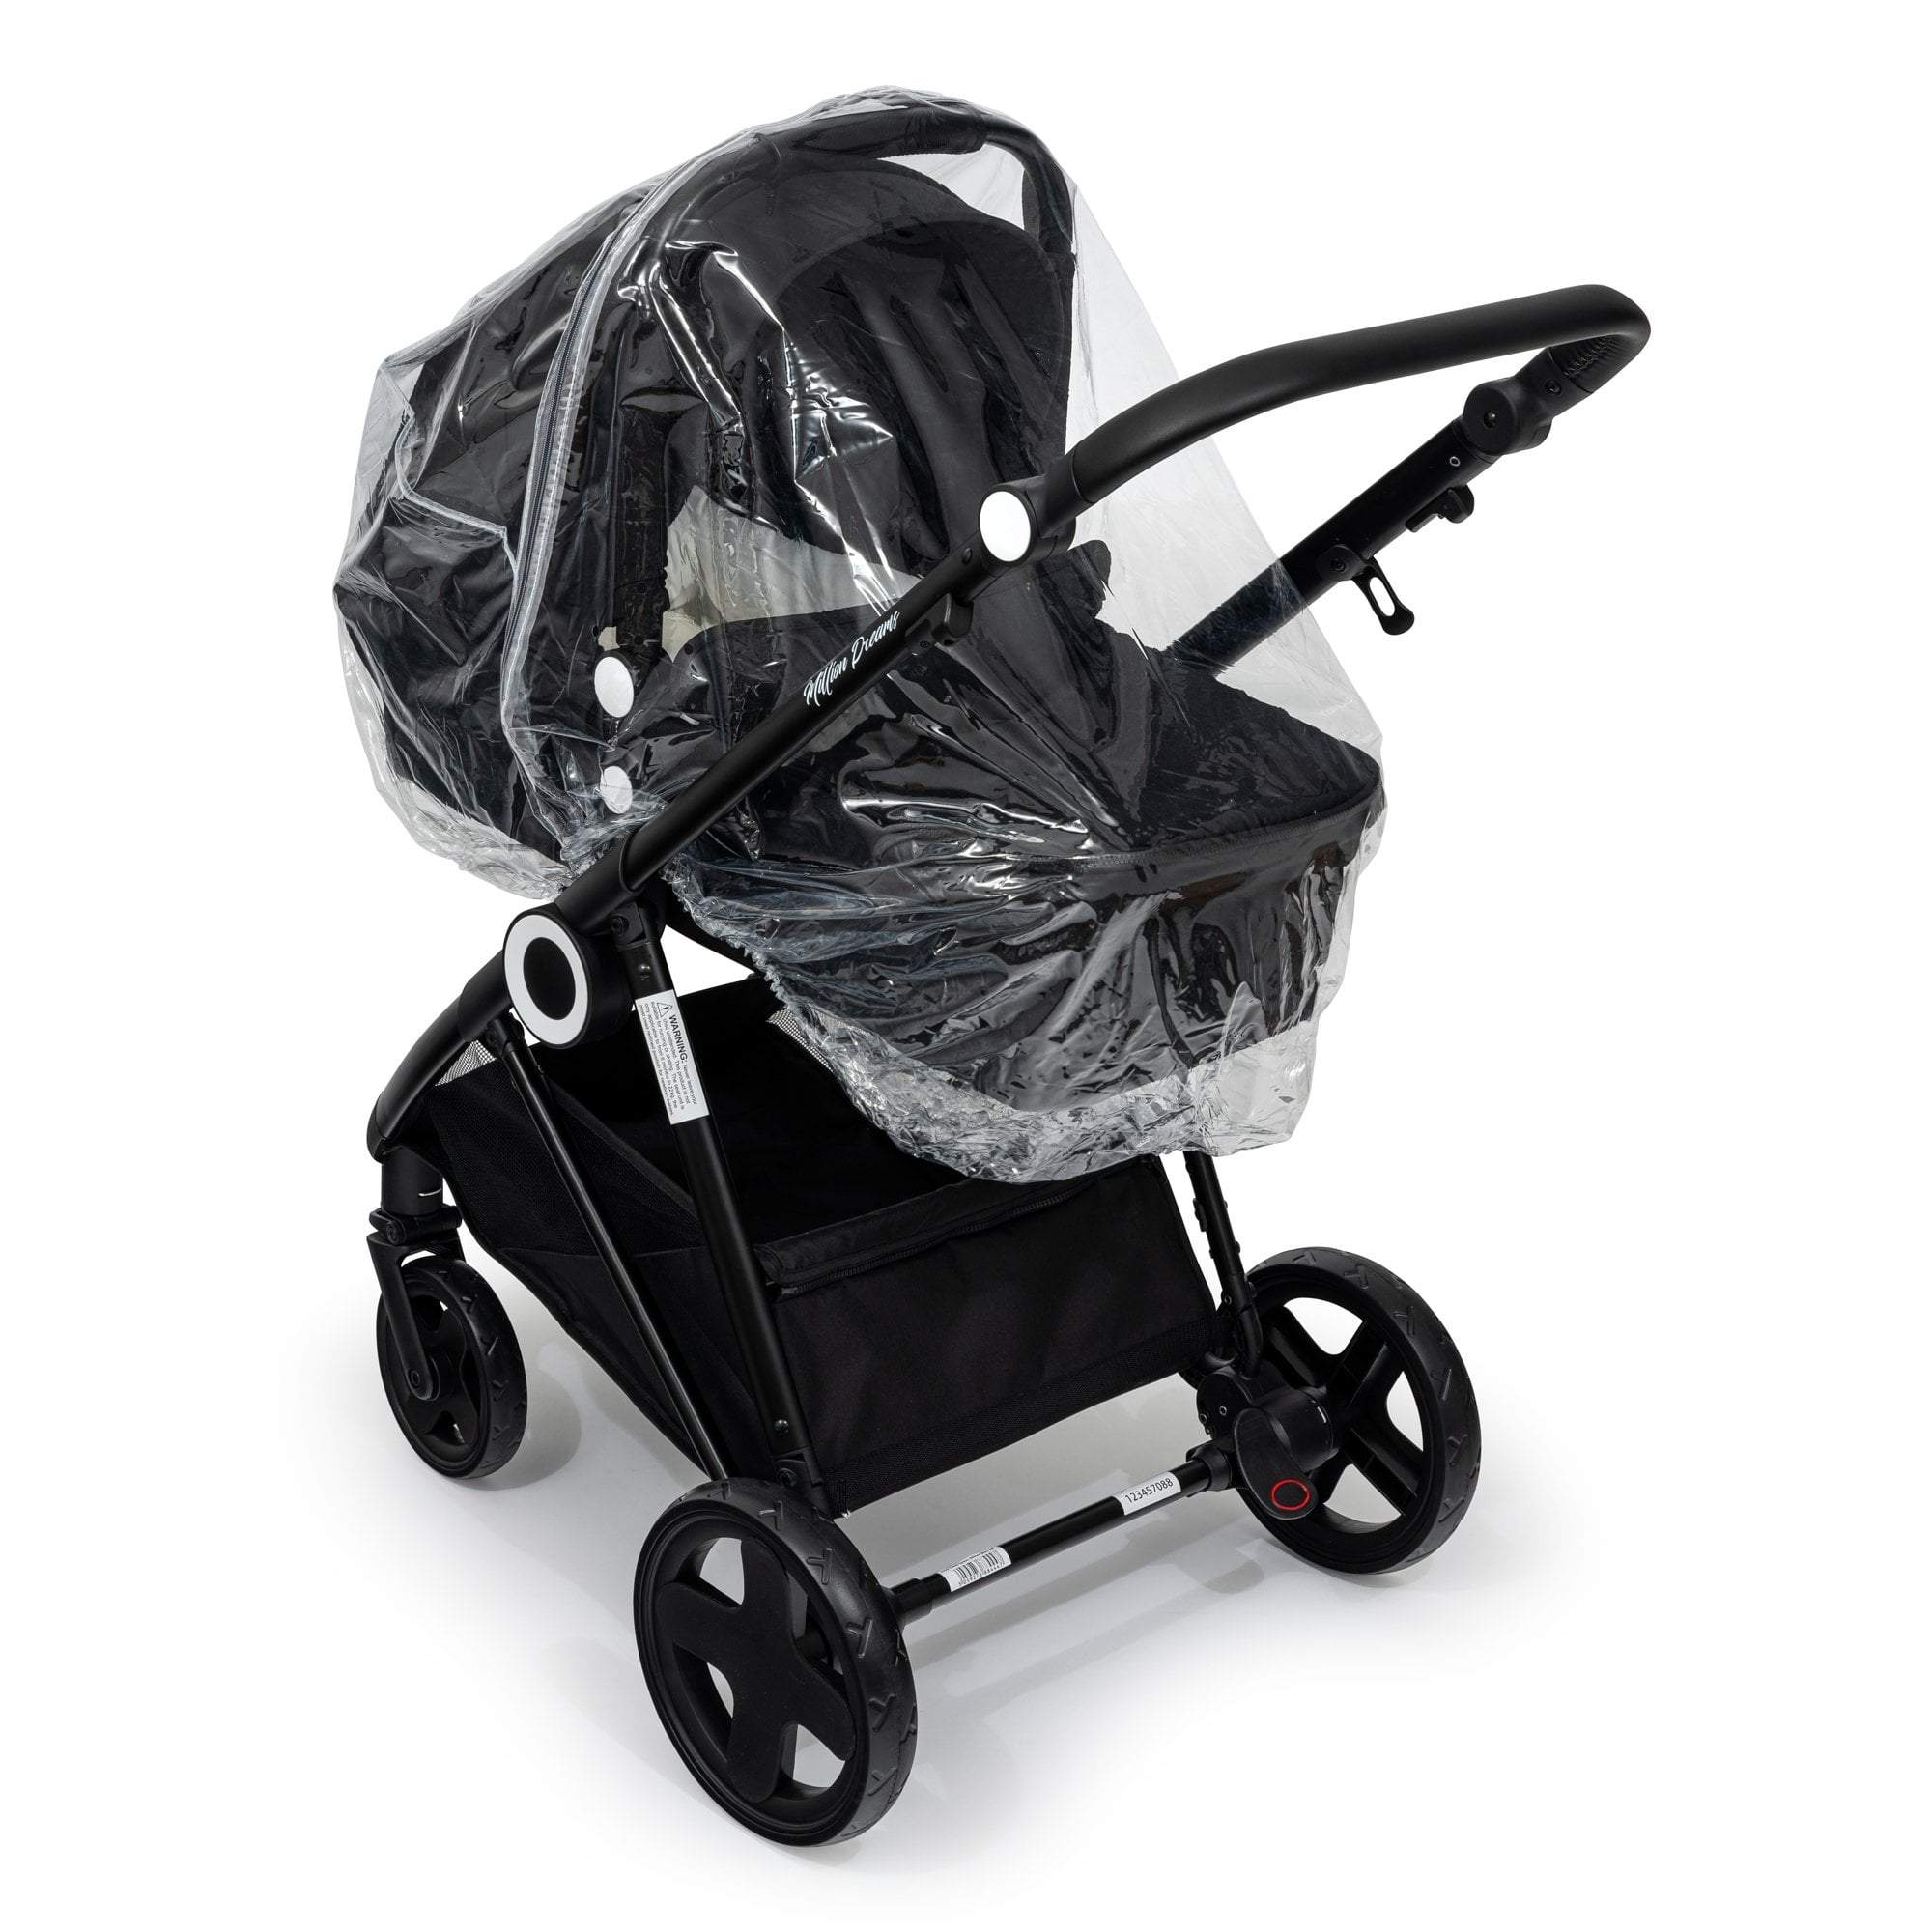 Carrycot Raincover Compatible With Mima - Fits All Models - For Your Little One